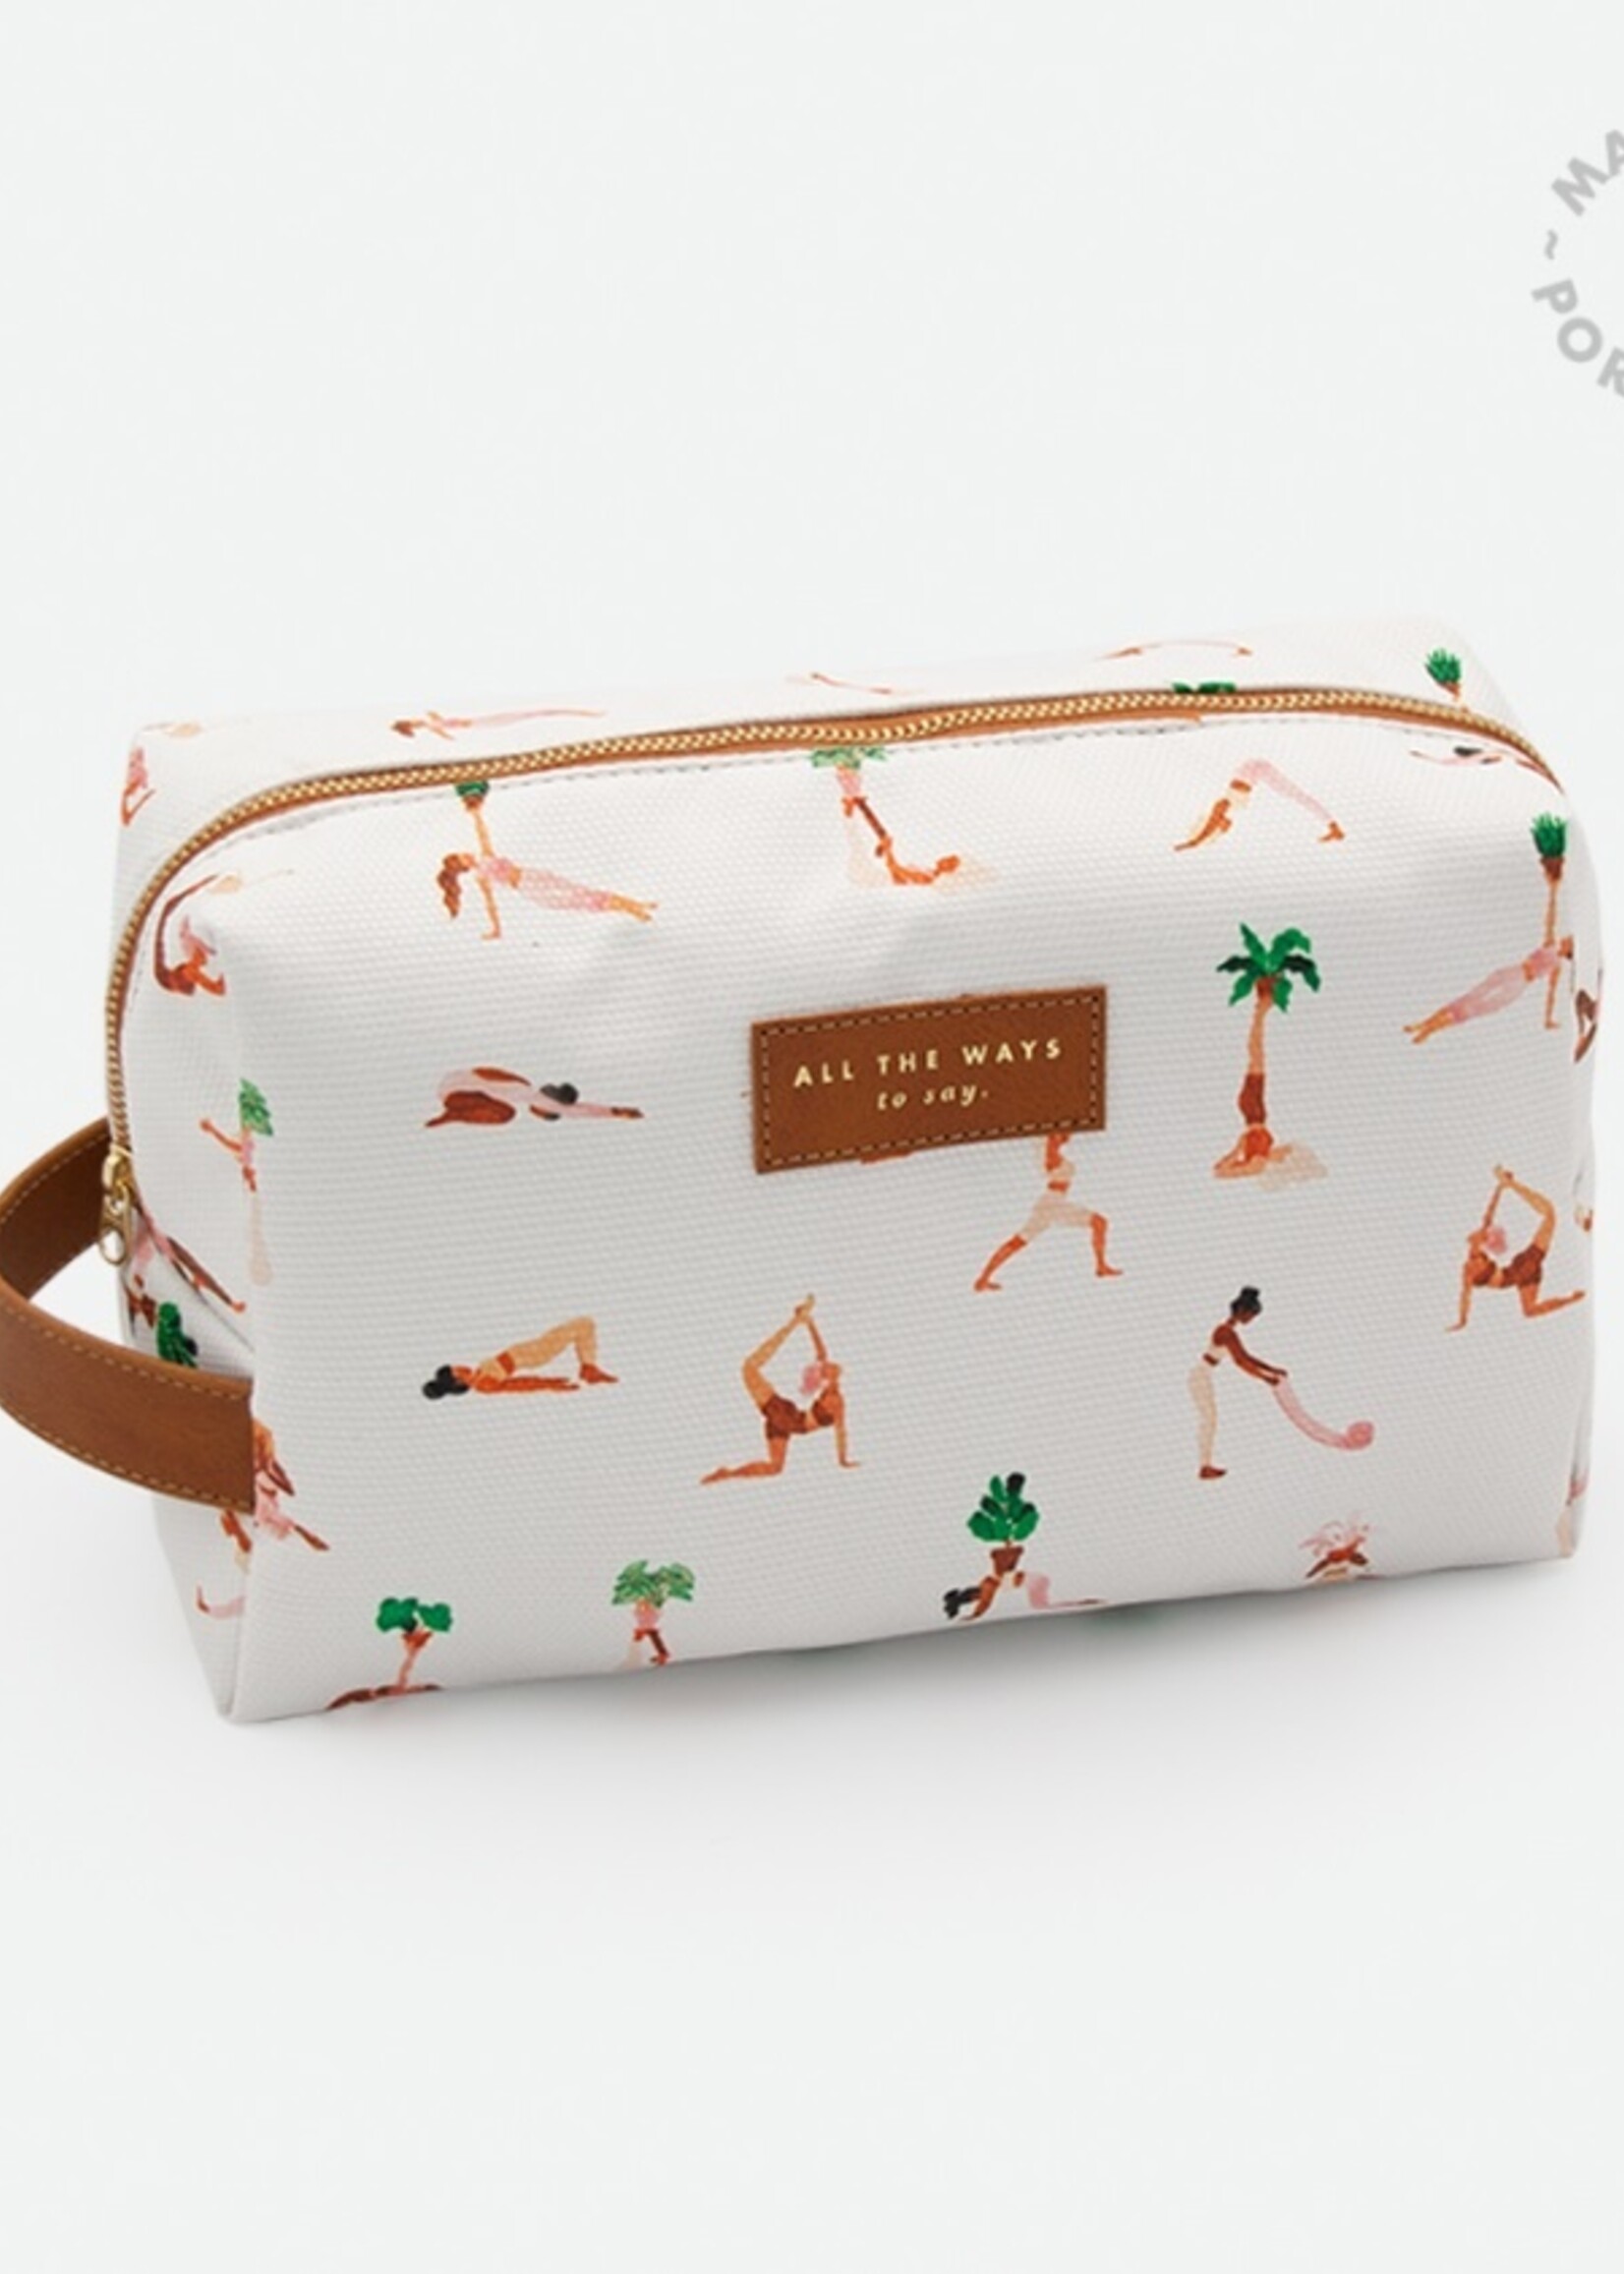 ATWTS Toiletry bags Yoga